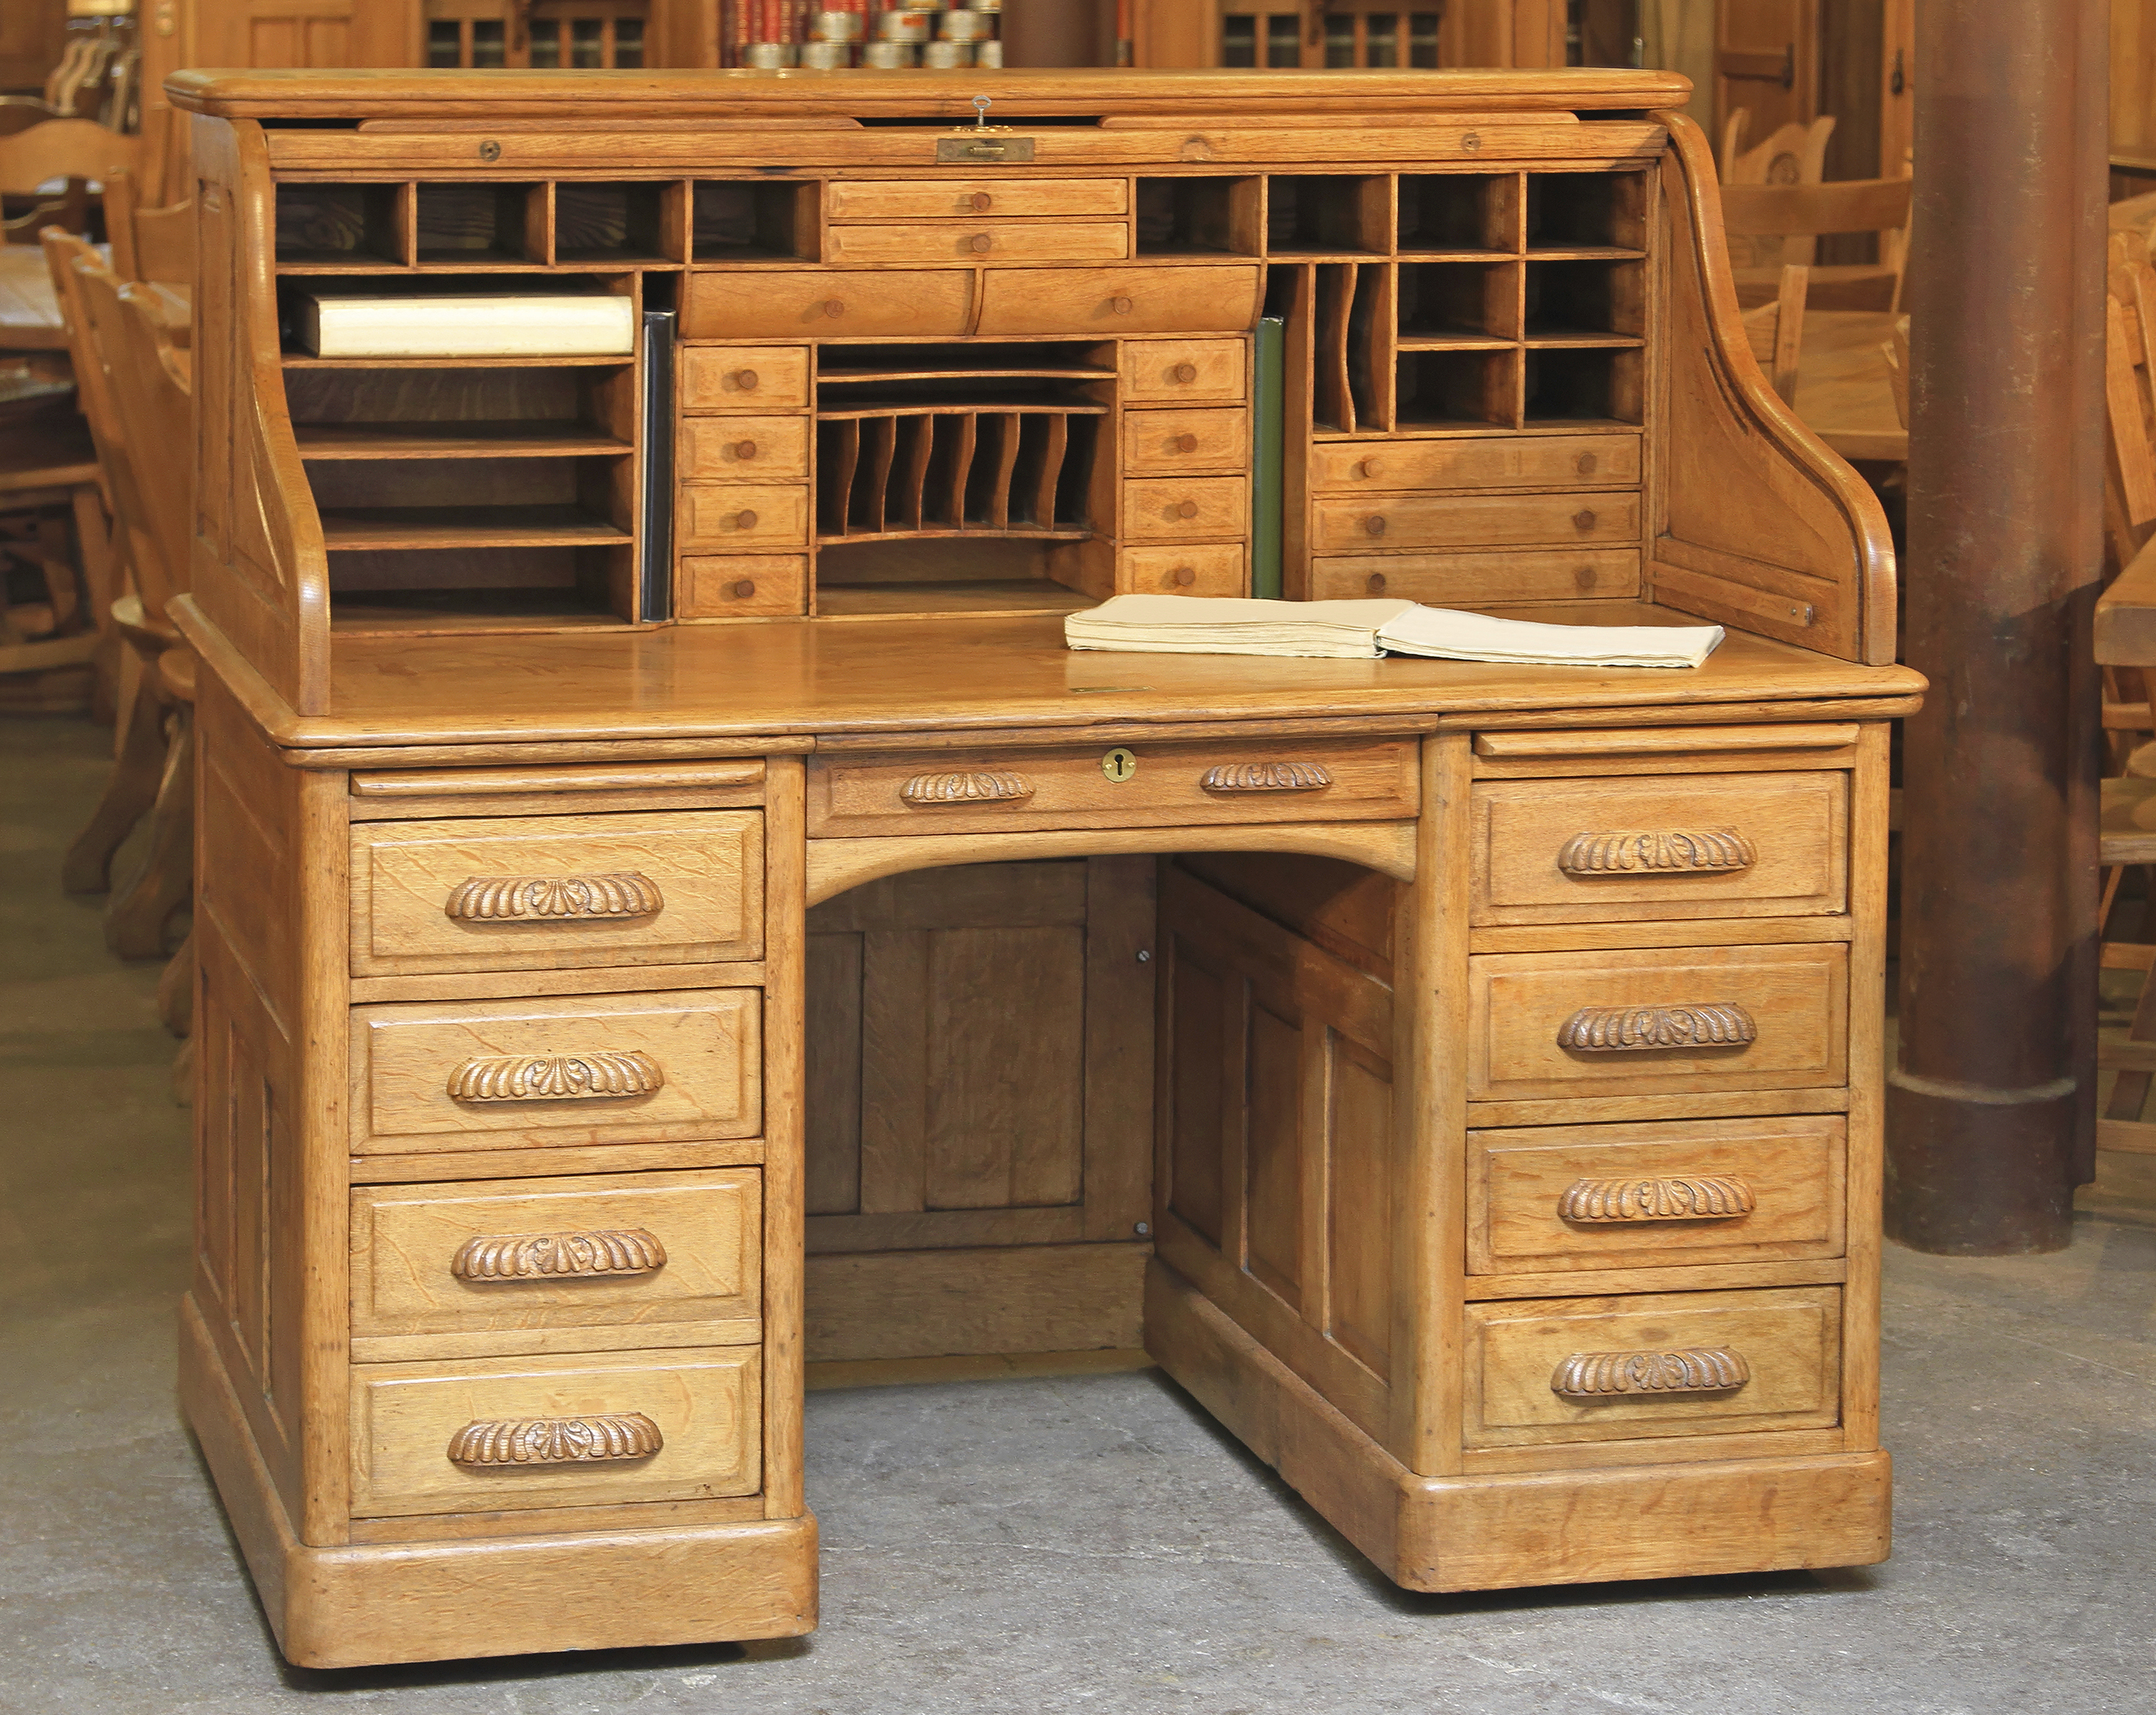 Identifying Antique Writing Desks and Storage Pieces